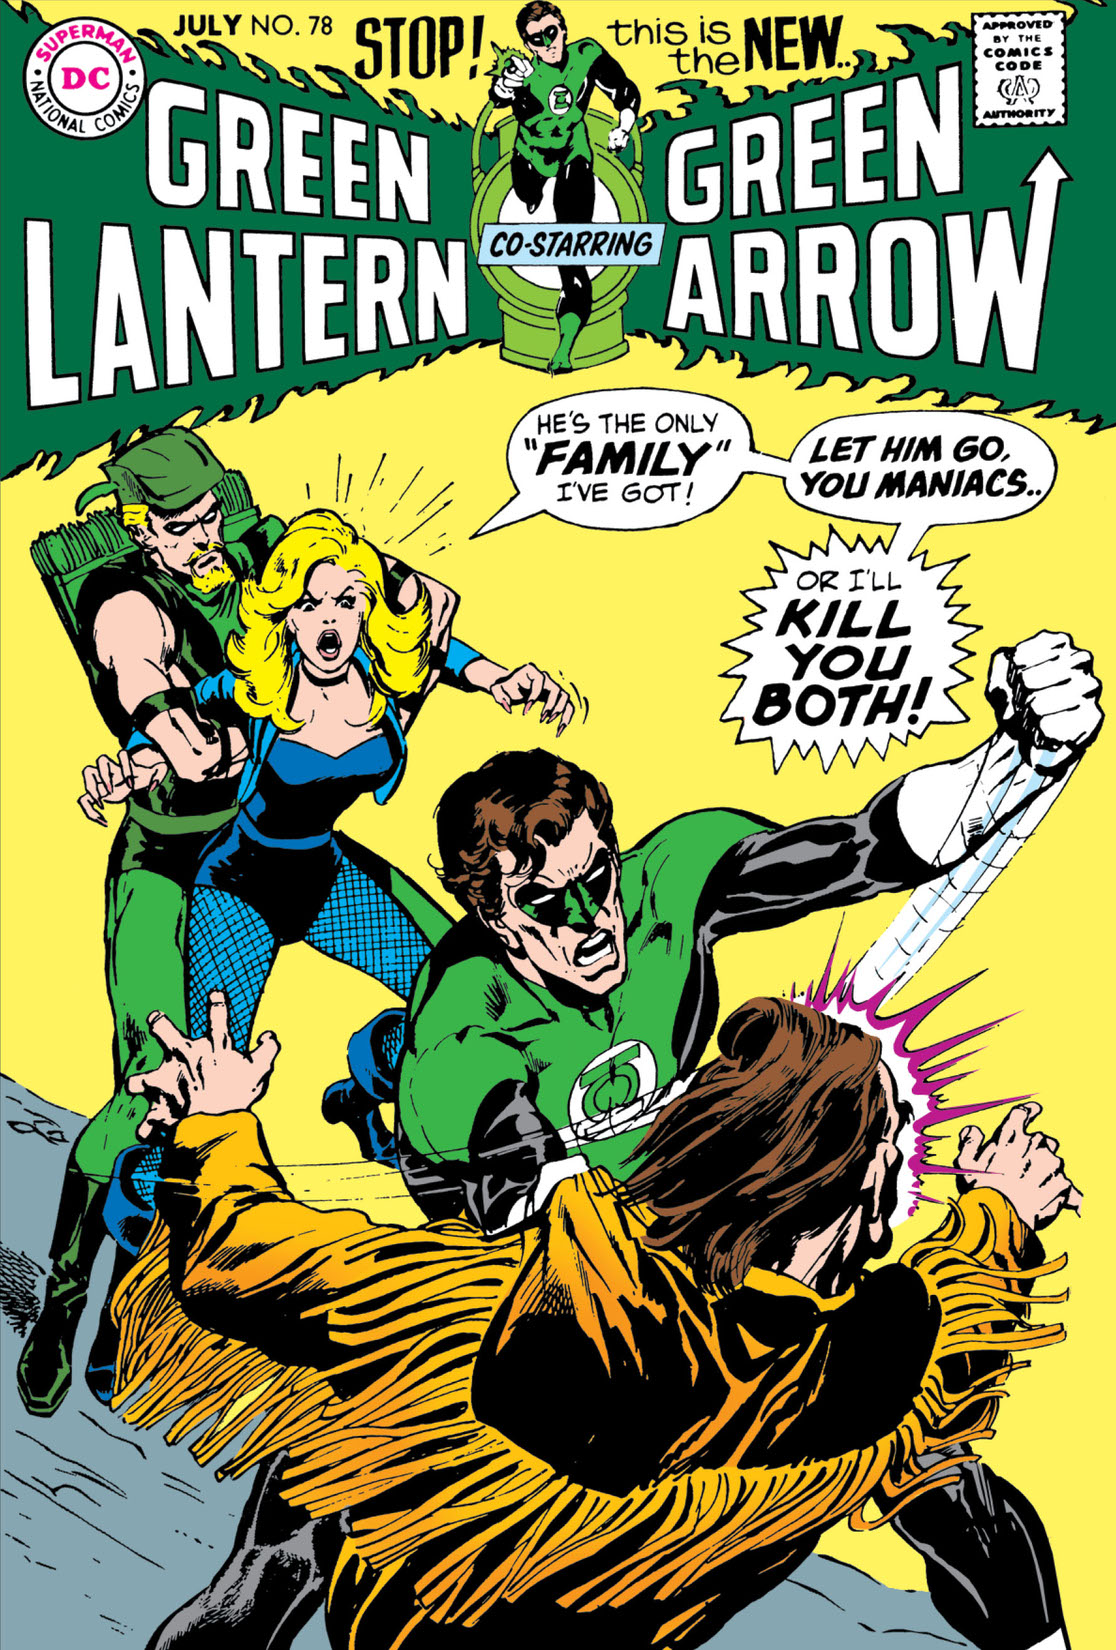 Green Lantern (1960-) #78 preview images